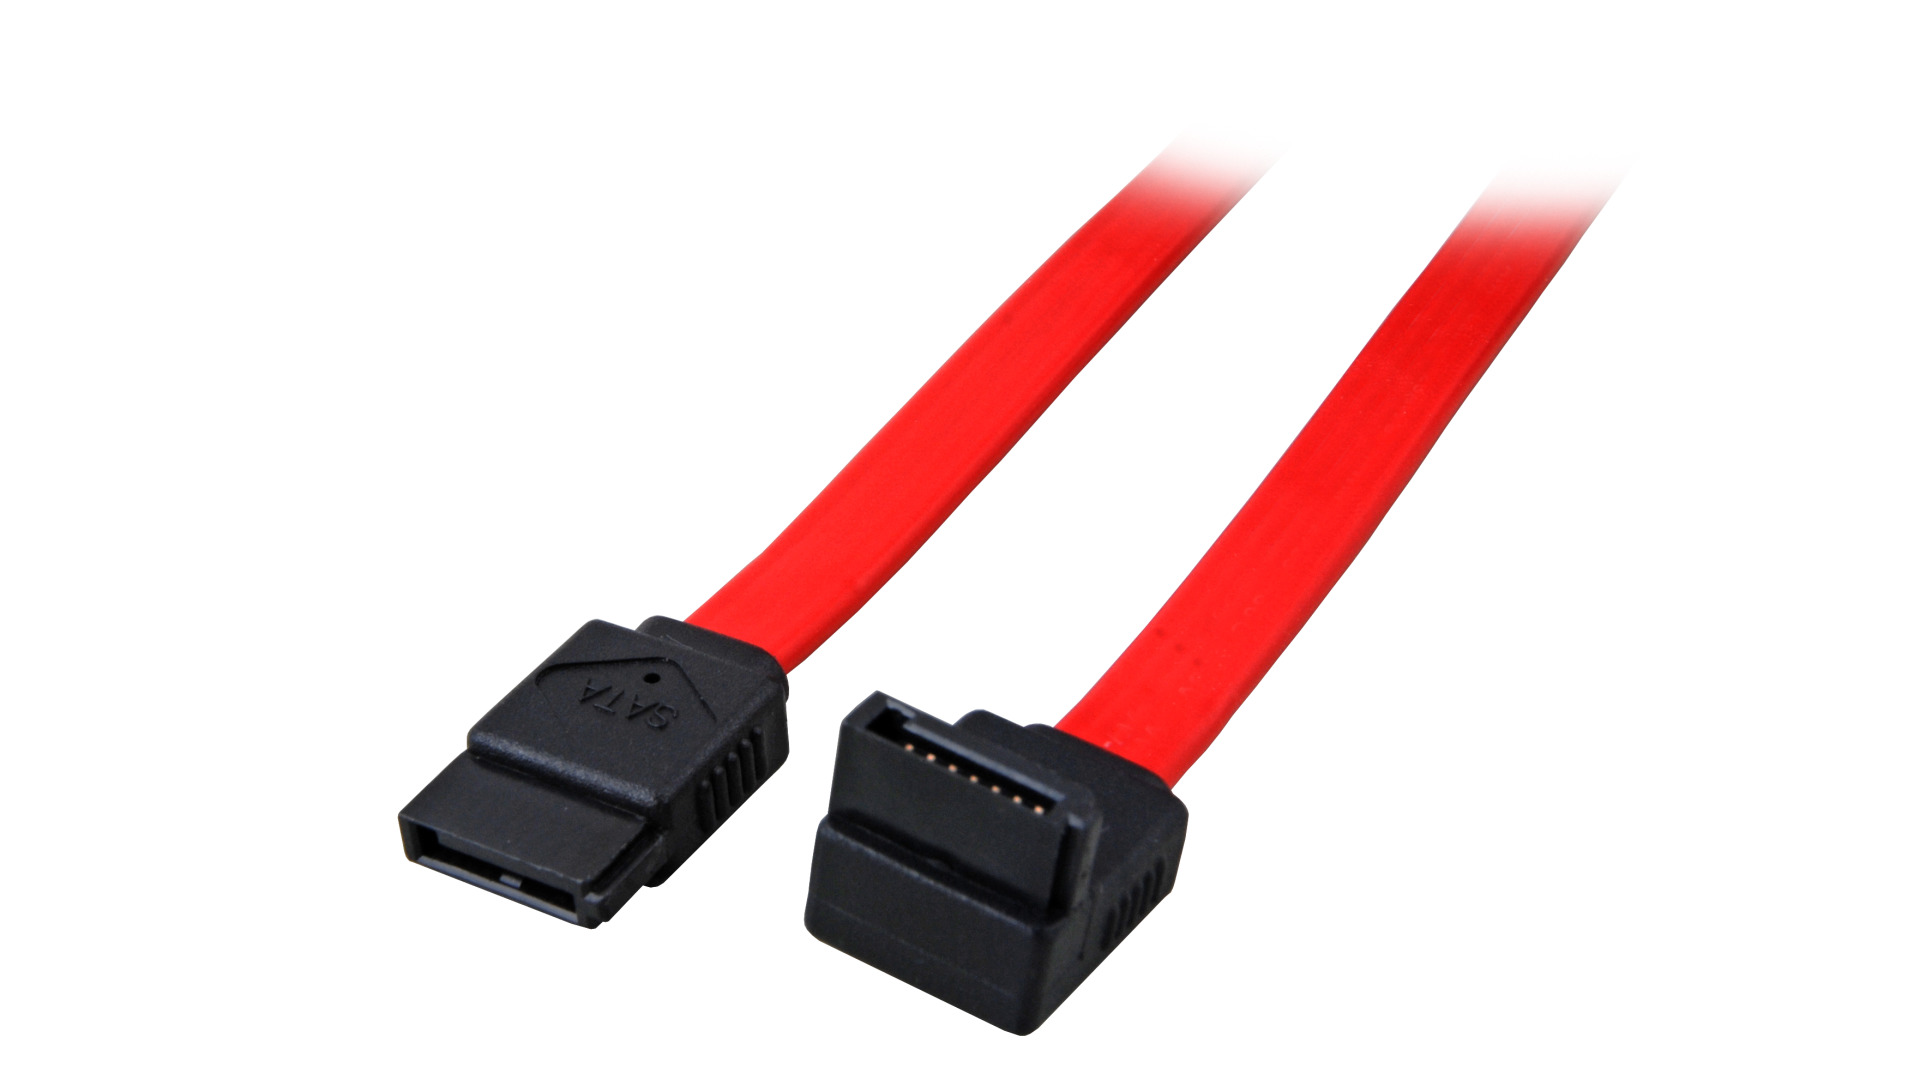 SATA Connection Cable, 2x SATA 7 , M-M, 0,5m, red